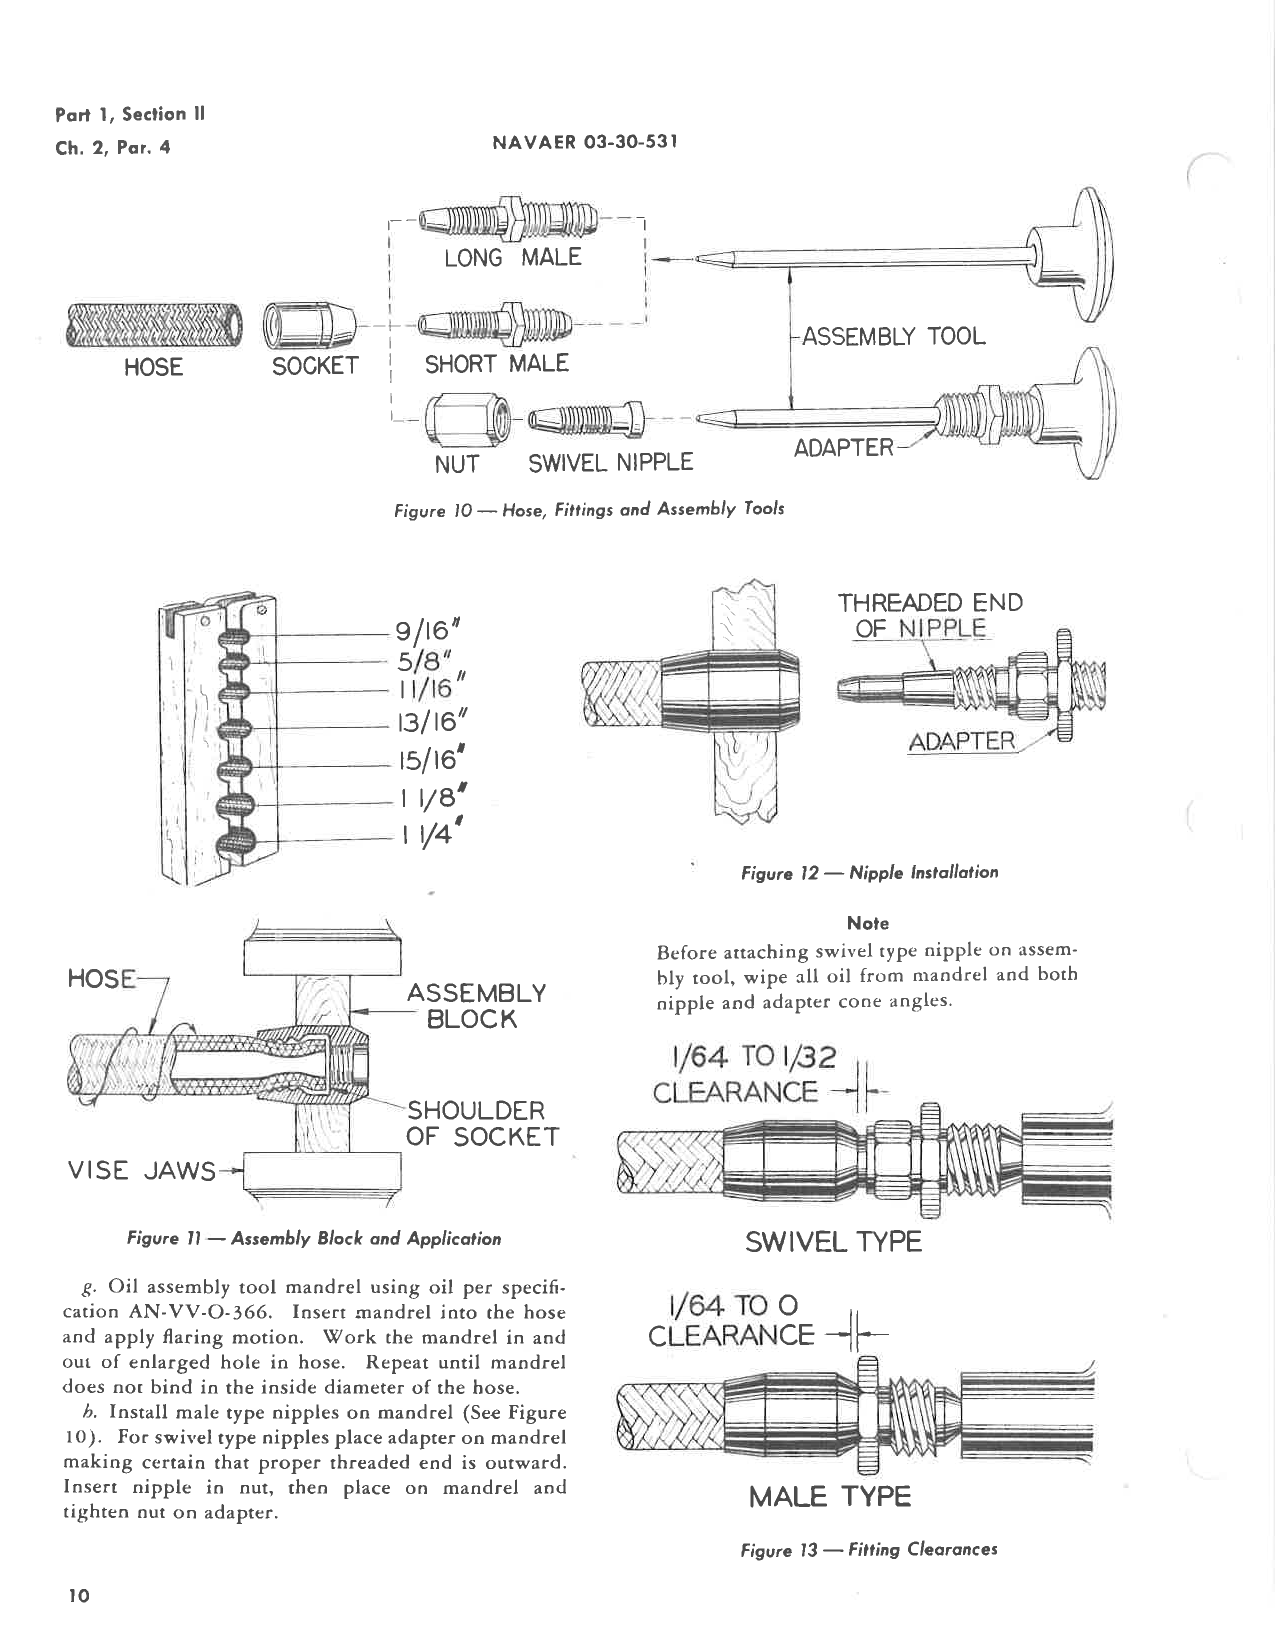 Sample page 16 from AirCorps Library document: Hydraulic Handbook - TBM